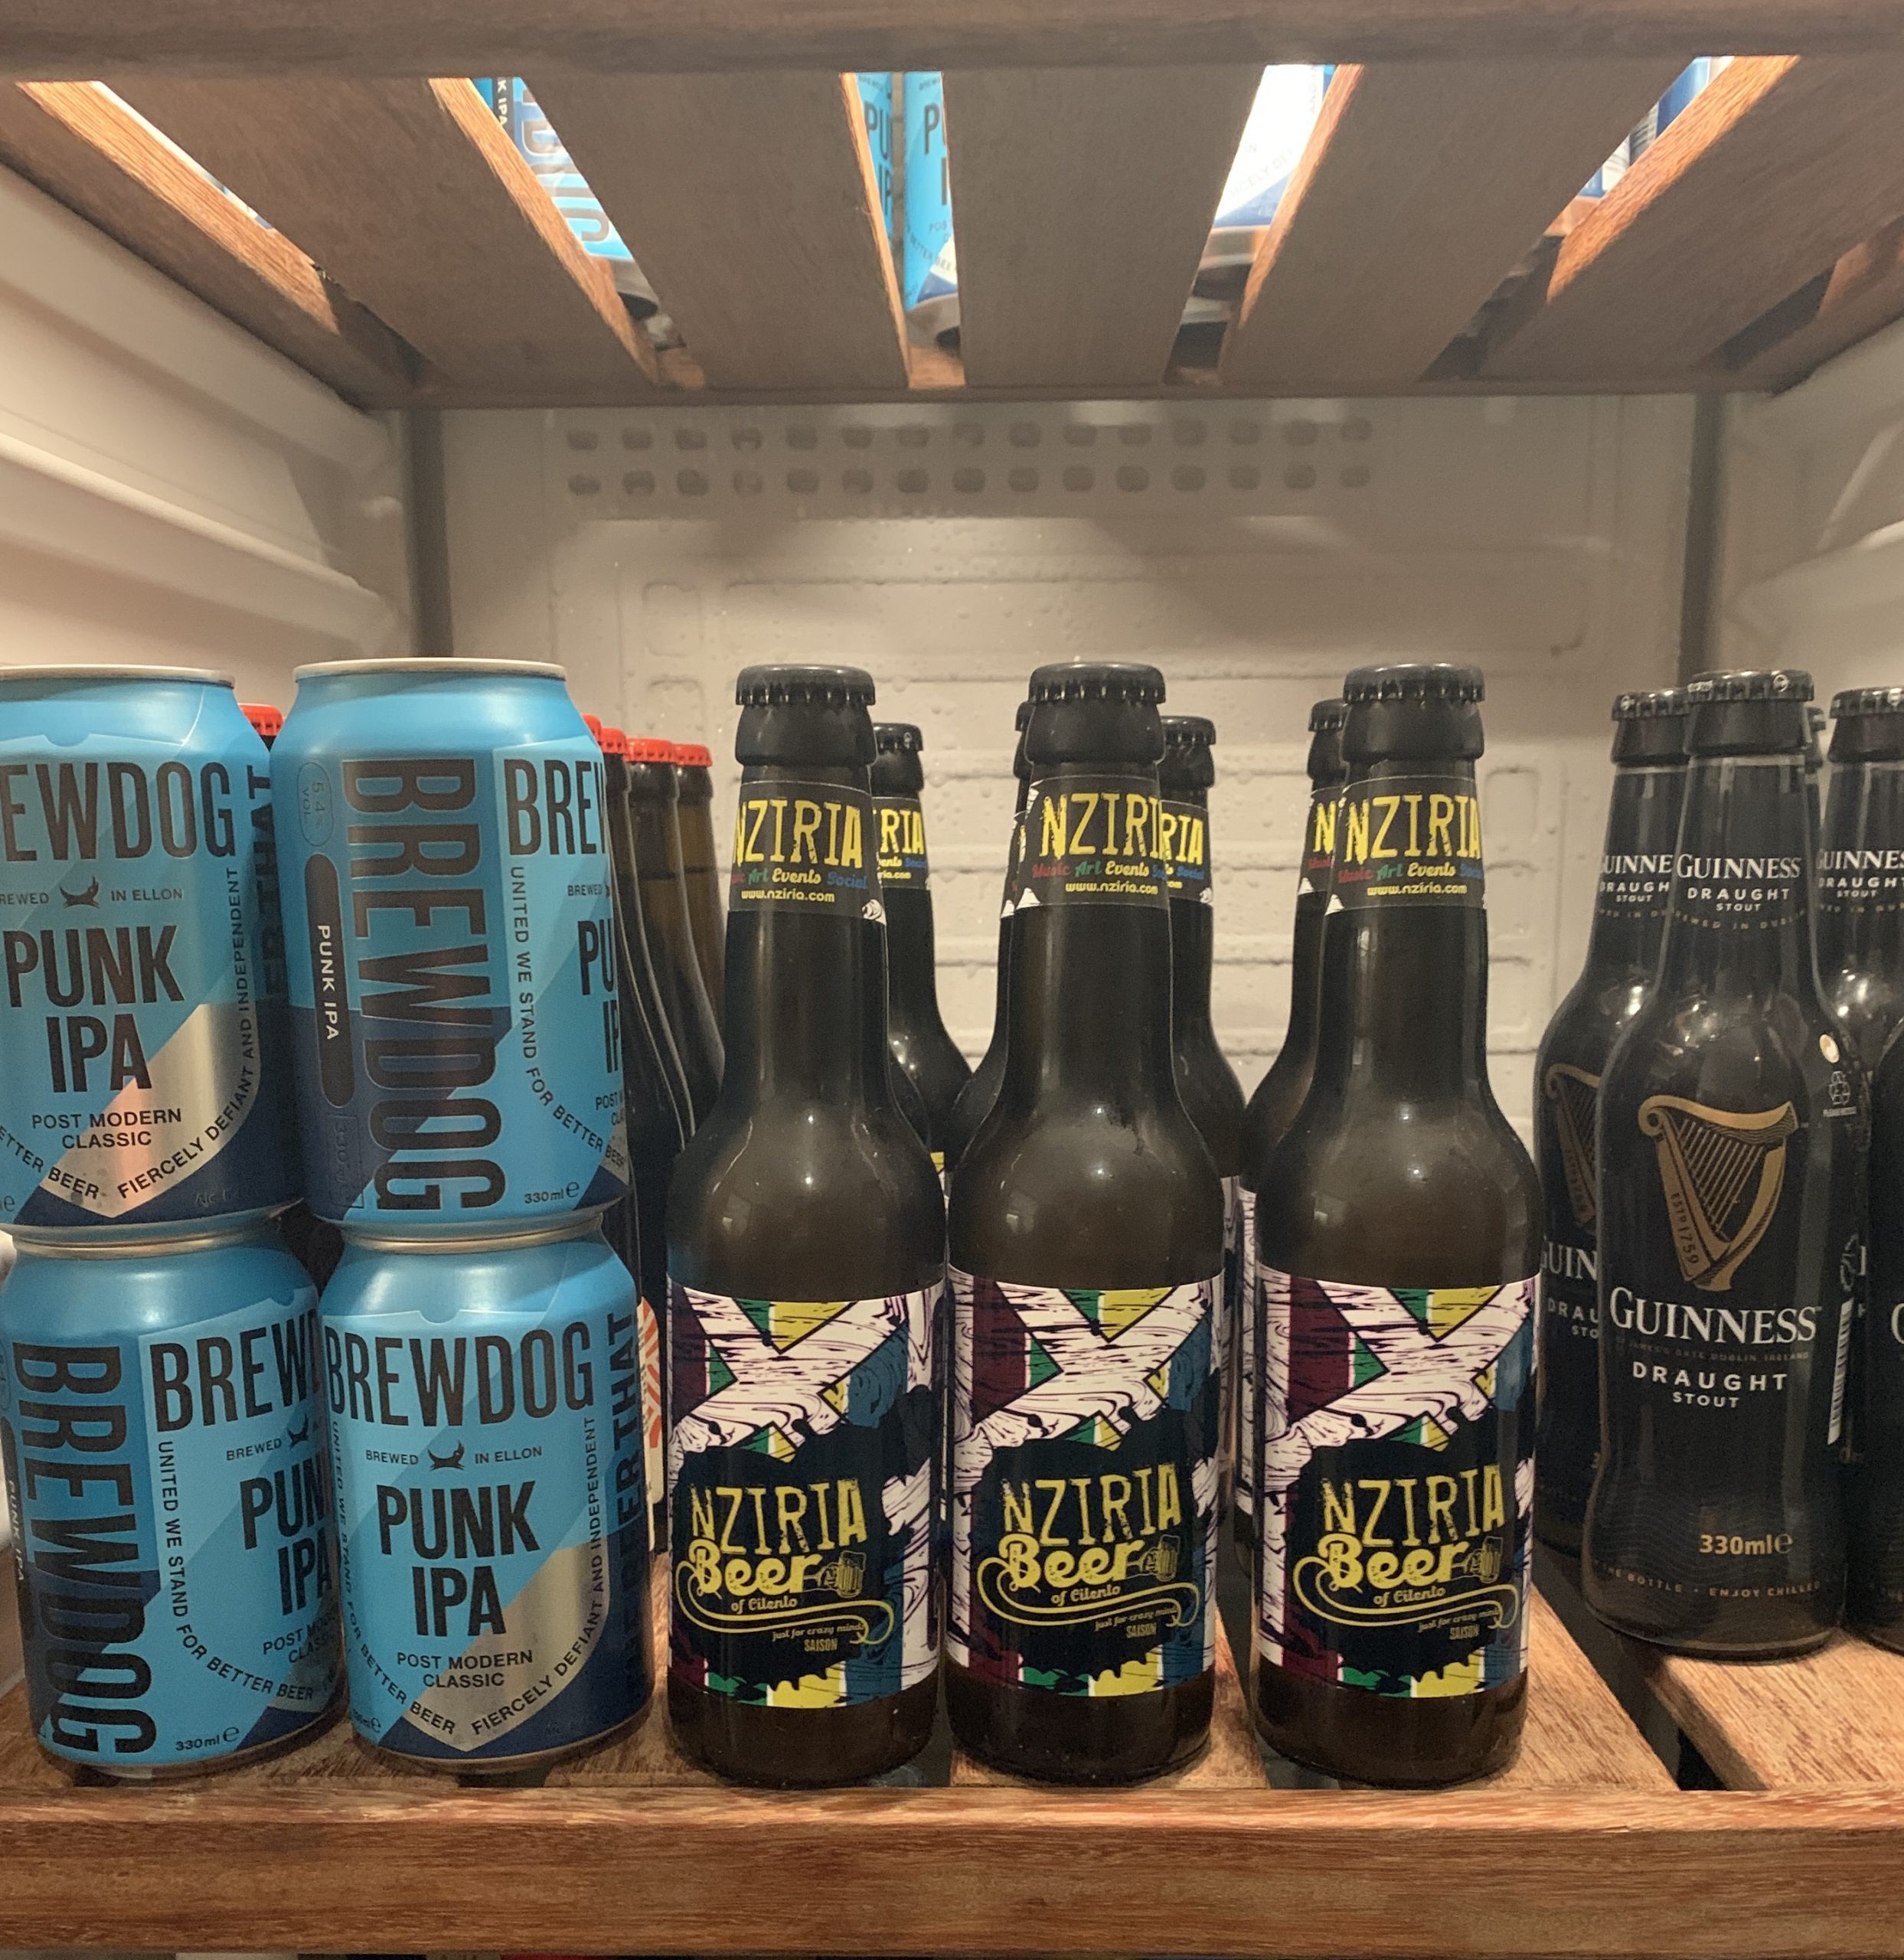 NZIRIA BEER with brew dog and Guinness display at Cantina cicerenella Bracigliano